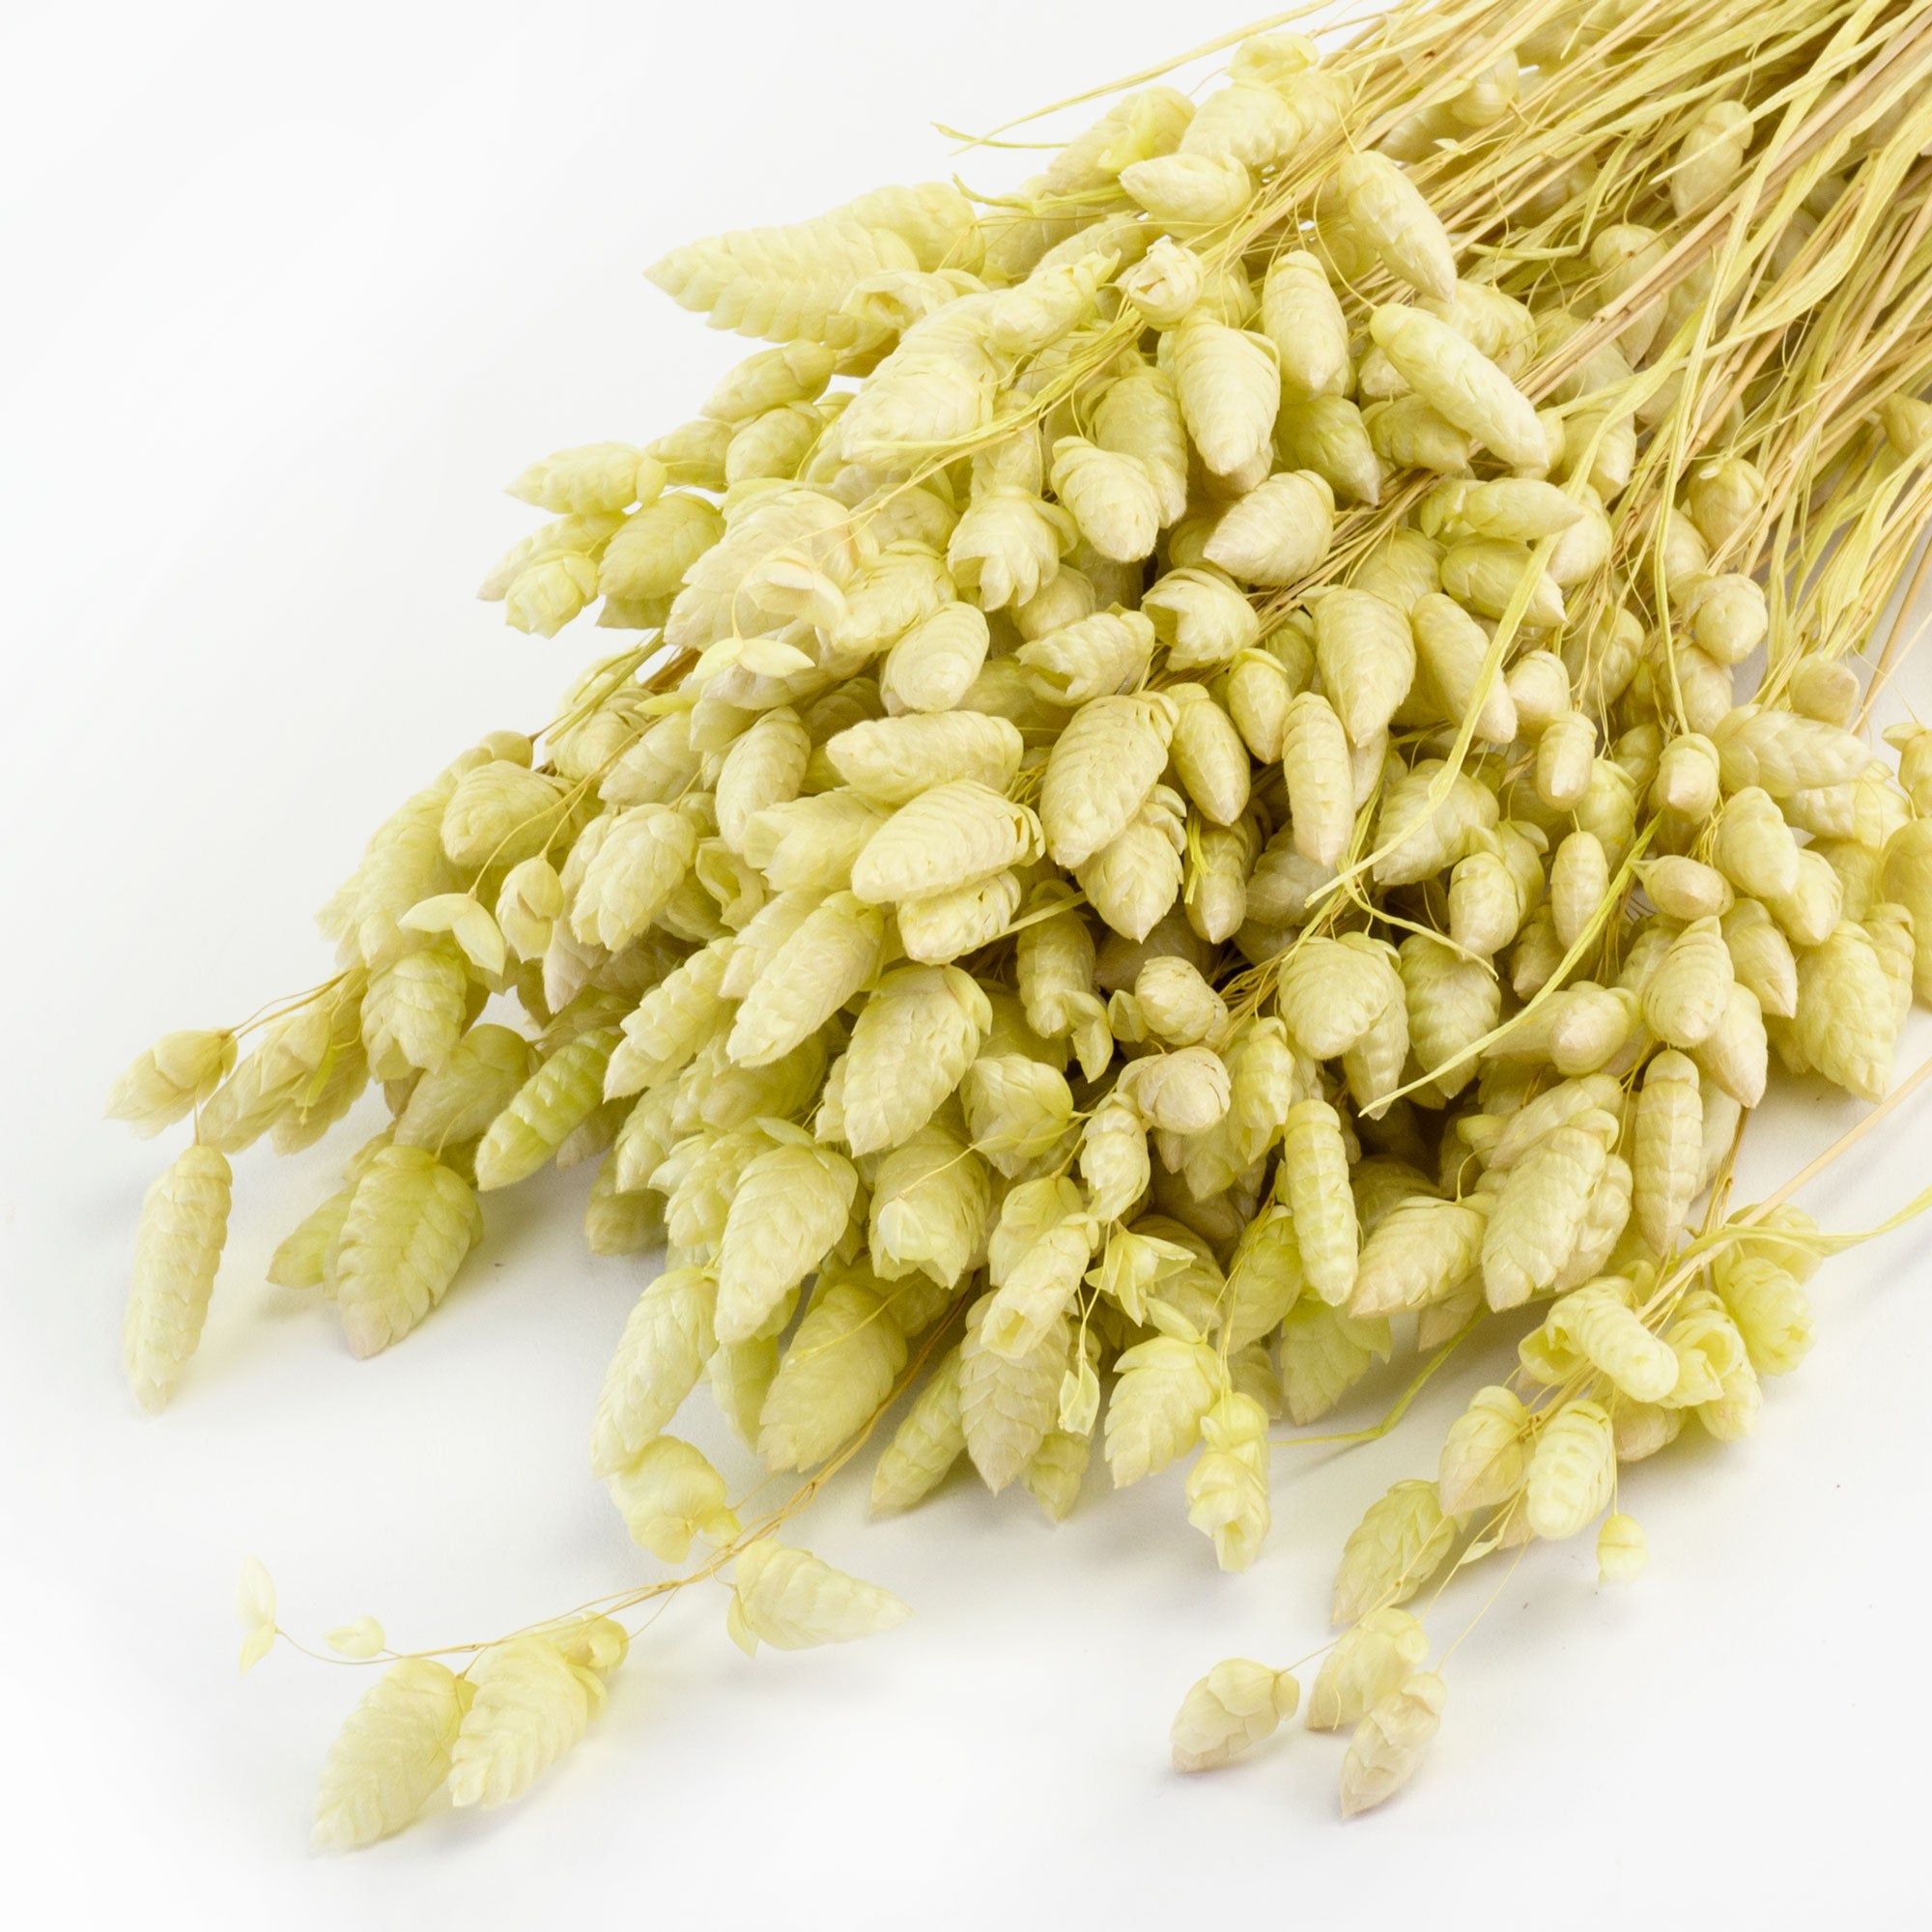 This image shows a bunch of misty green briza maxima against a white background